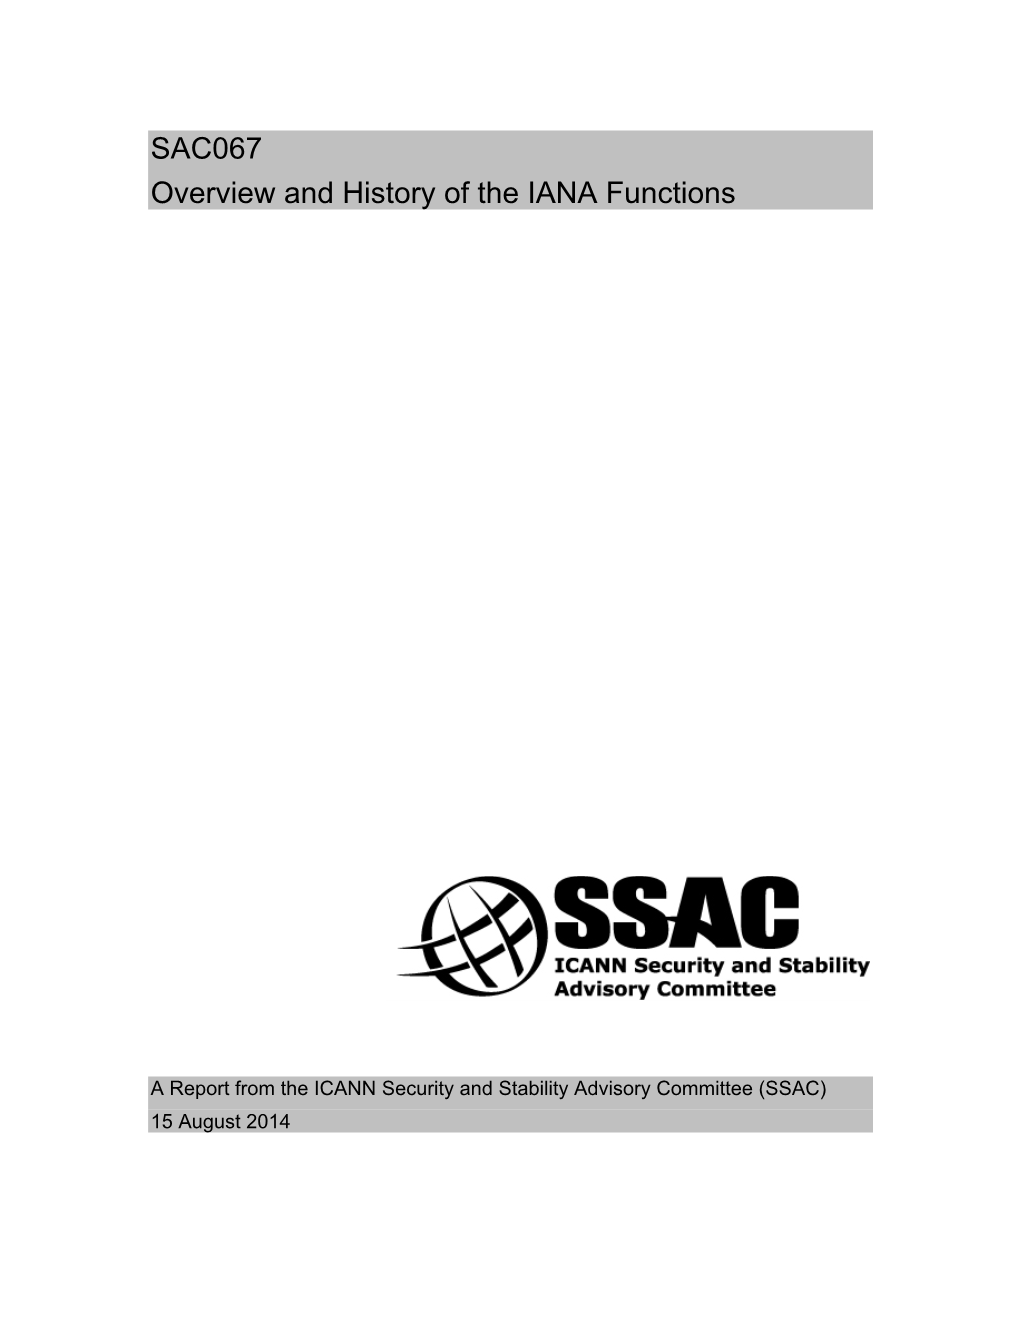 SAC067 Overview and History of the IANA Functions